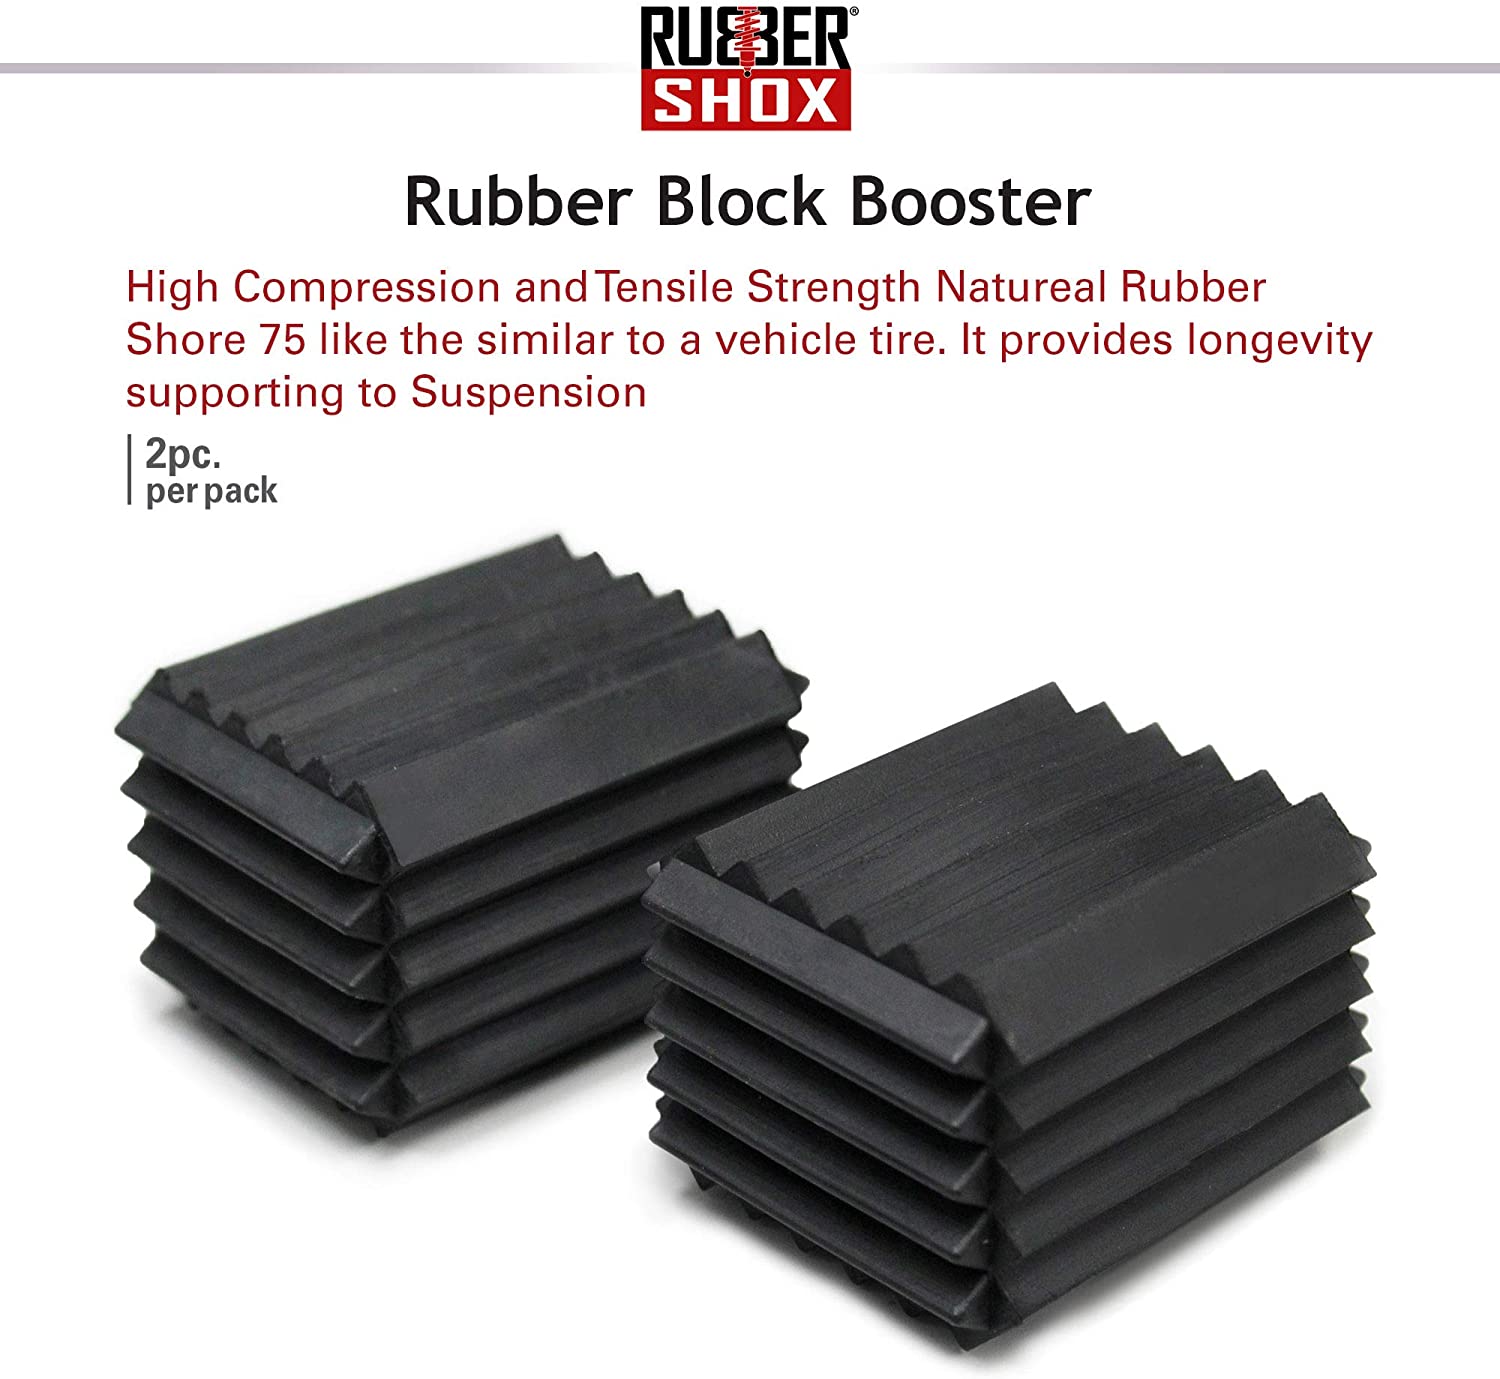 U.S. RubberShox Automotive Coil Spring Block Boosters Series Pack, Performance Enhancement for Car Coil Spring Shock Absorption and Protection of Auto Suspension System (2